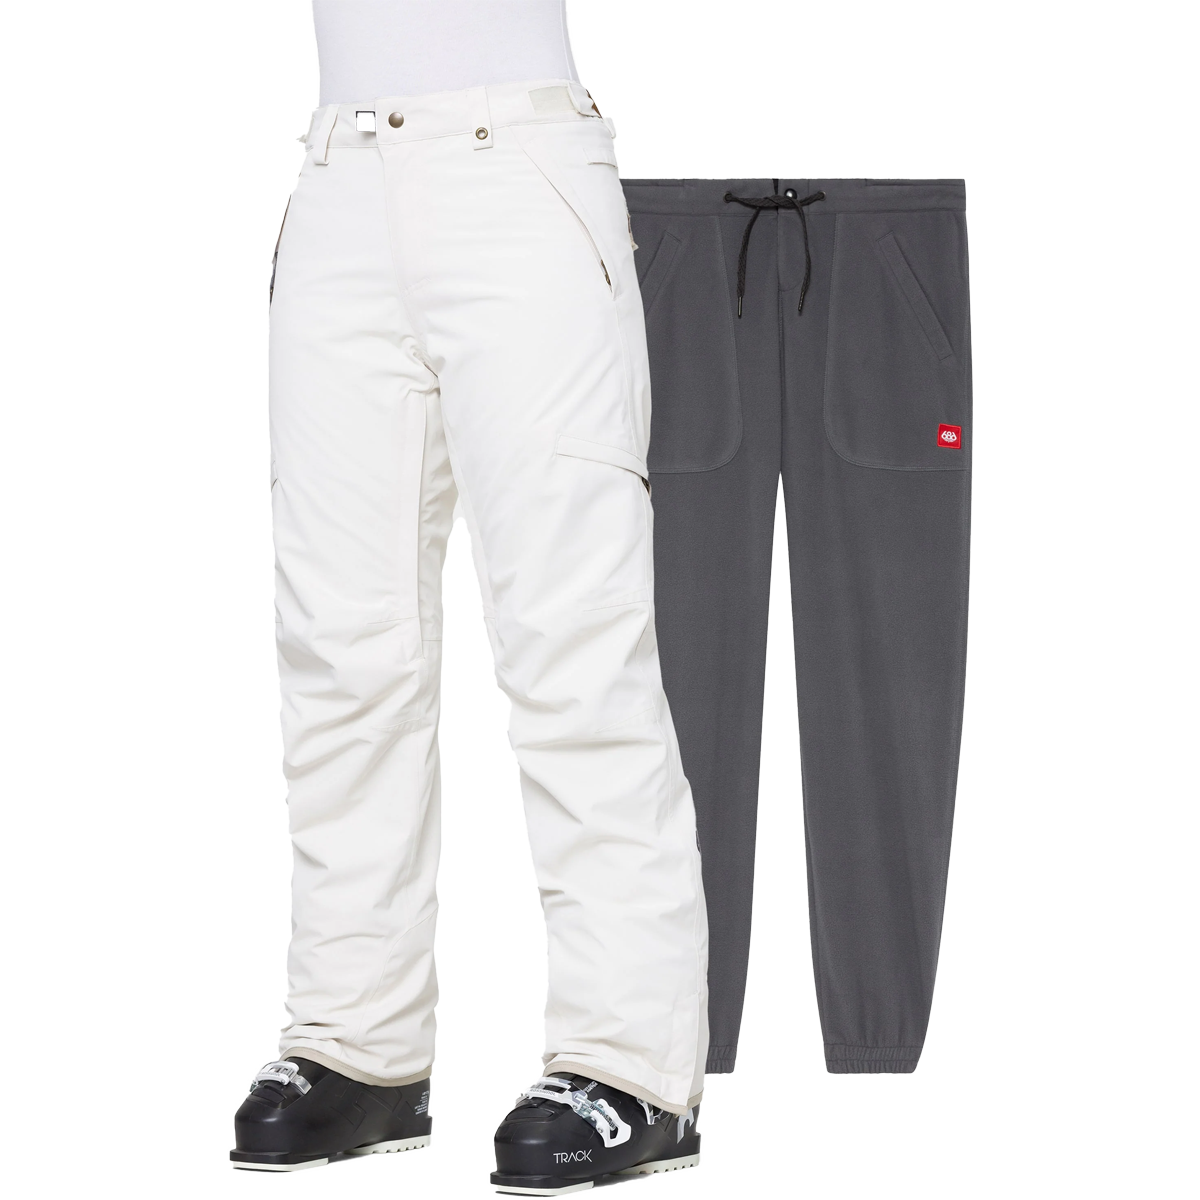 Women's Smarty 3-in-1 Cargo Pant alternate view